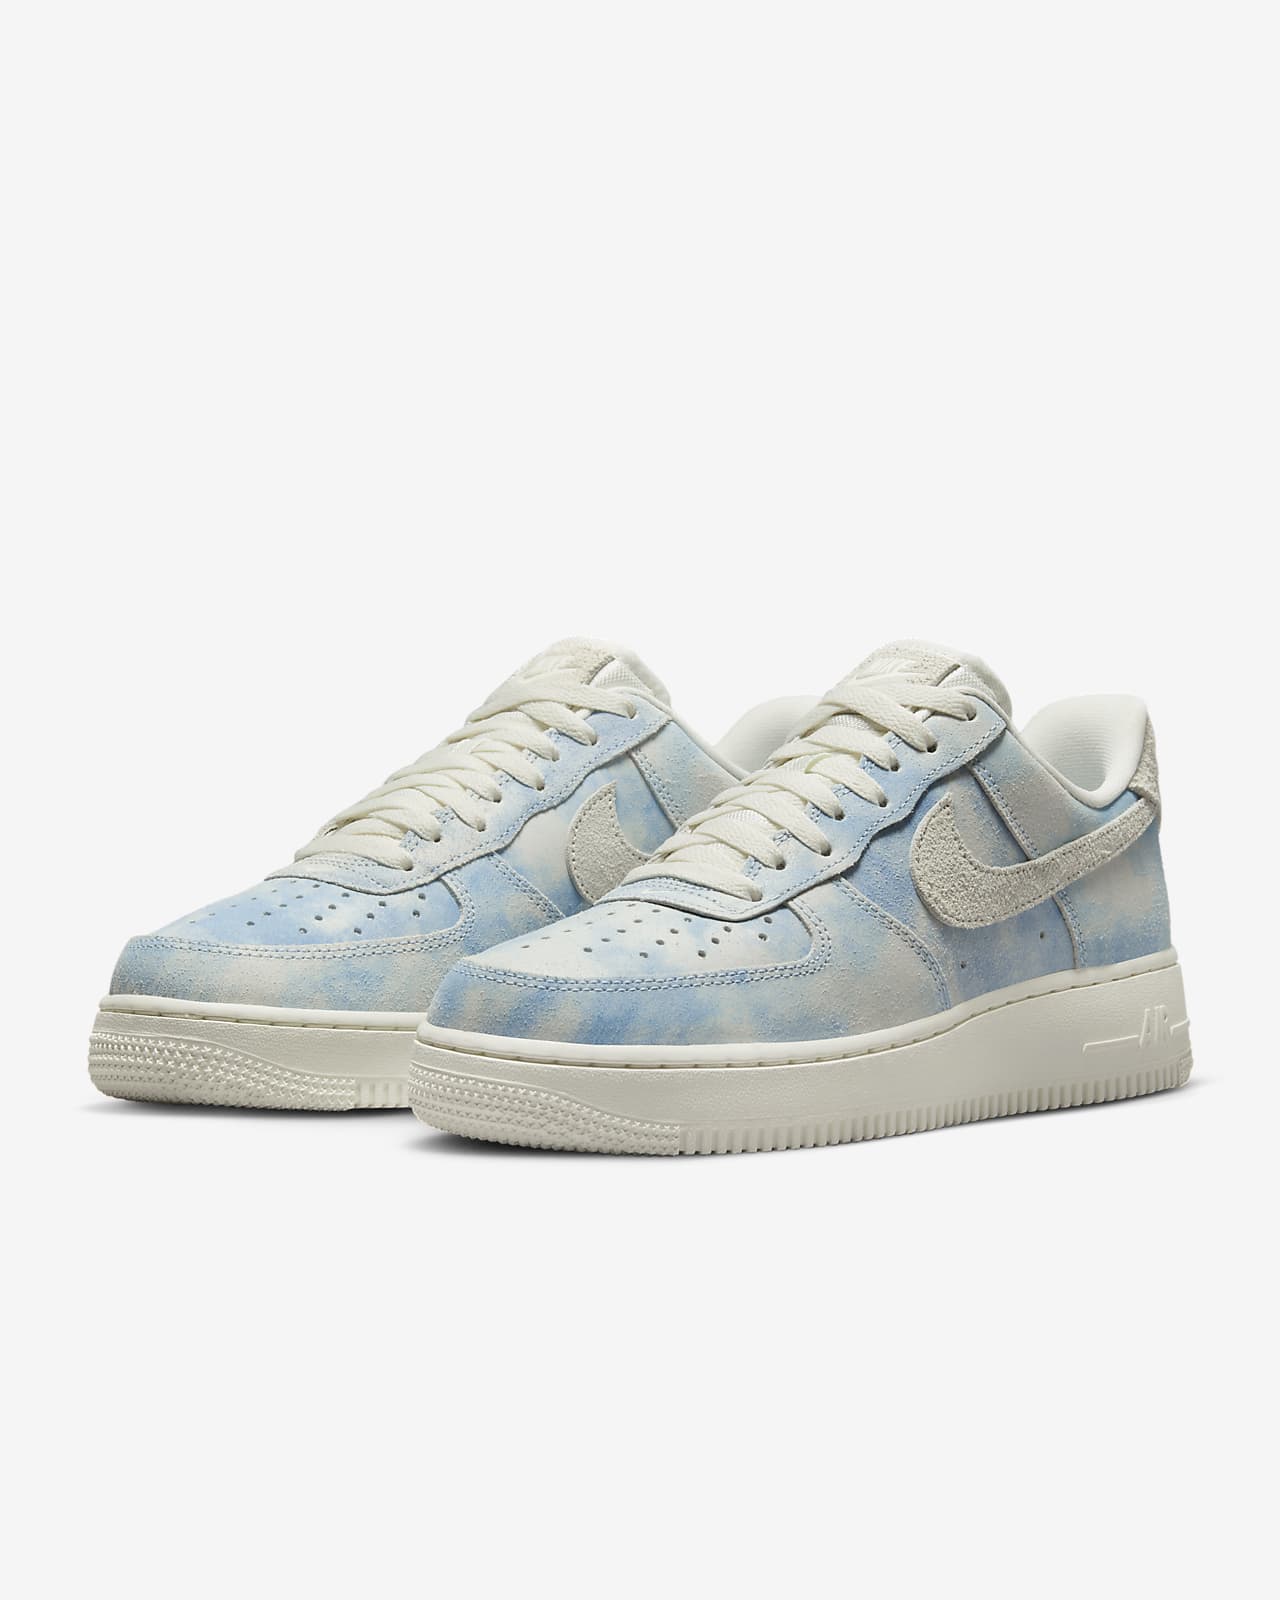 womens nike air force 1 07 size 7.5